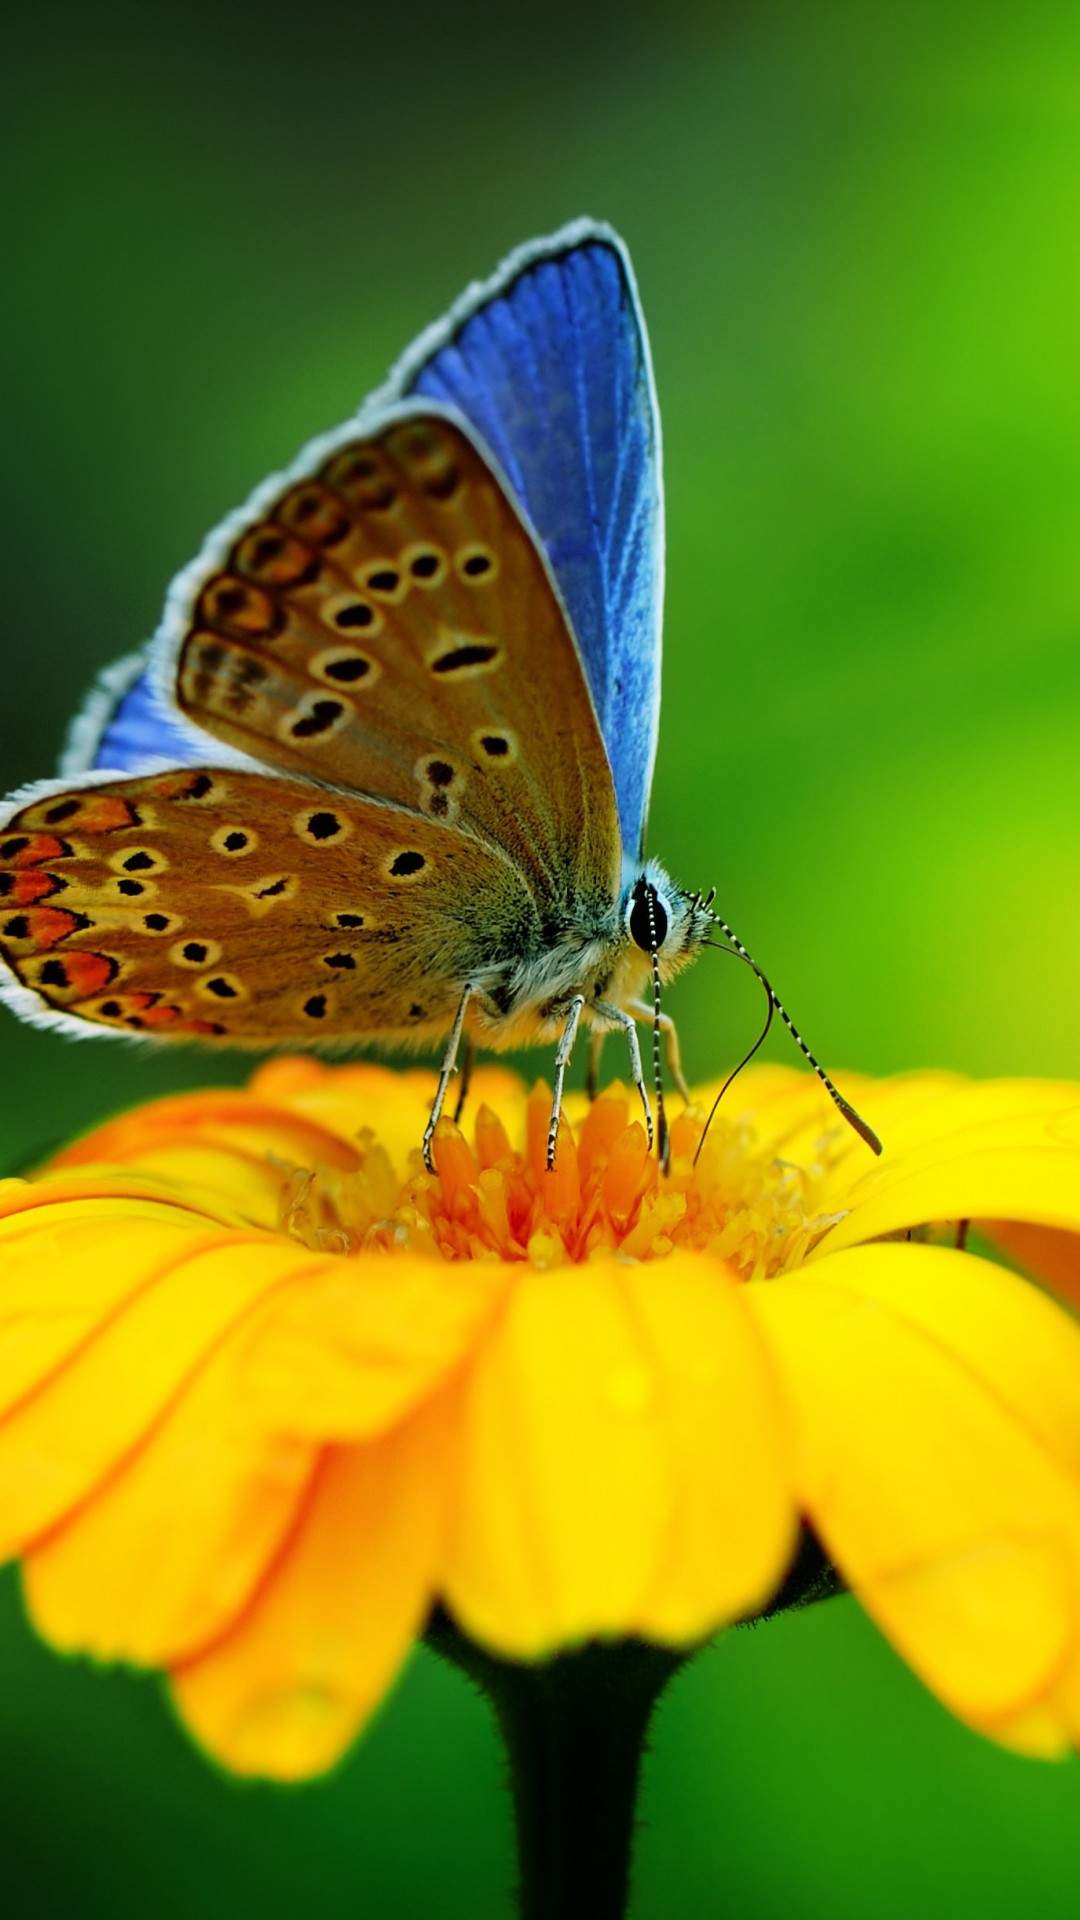 Butterfly Collecting Pollen Wallpaper for HTC One